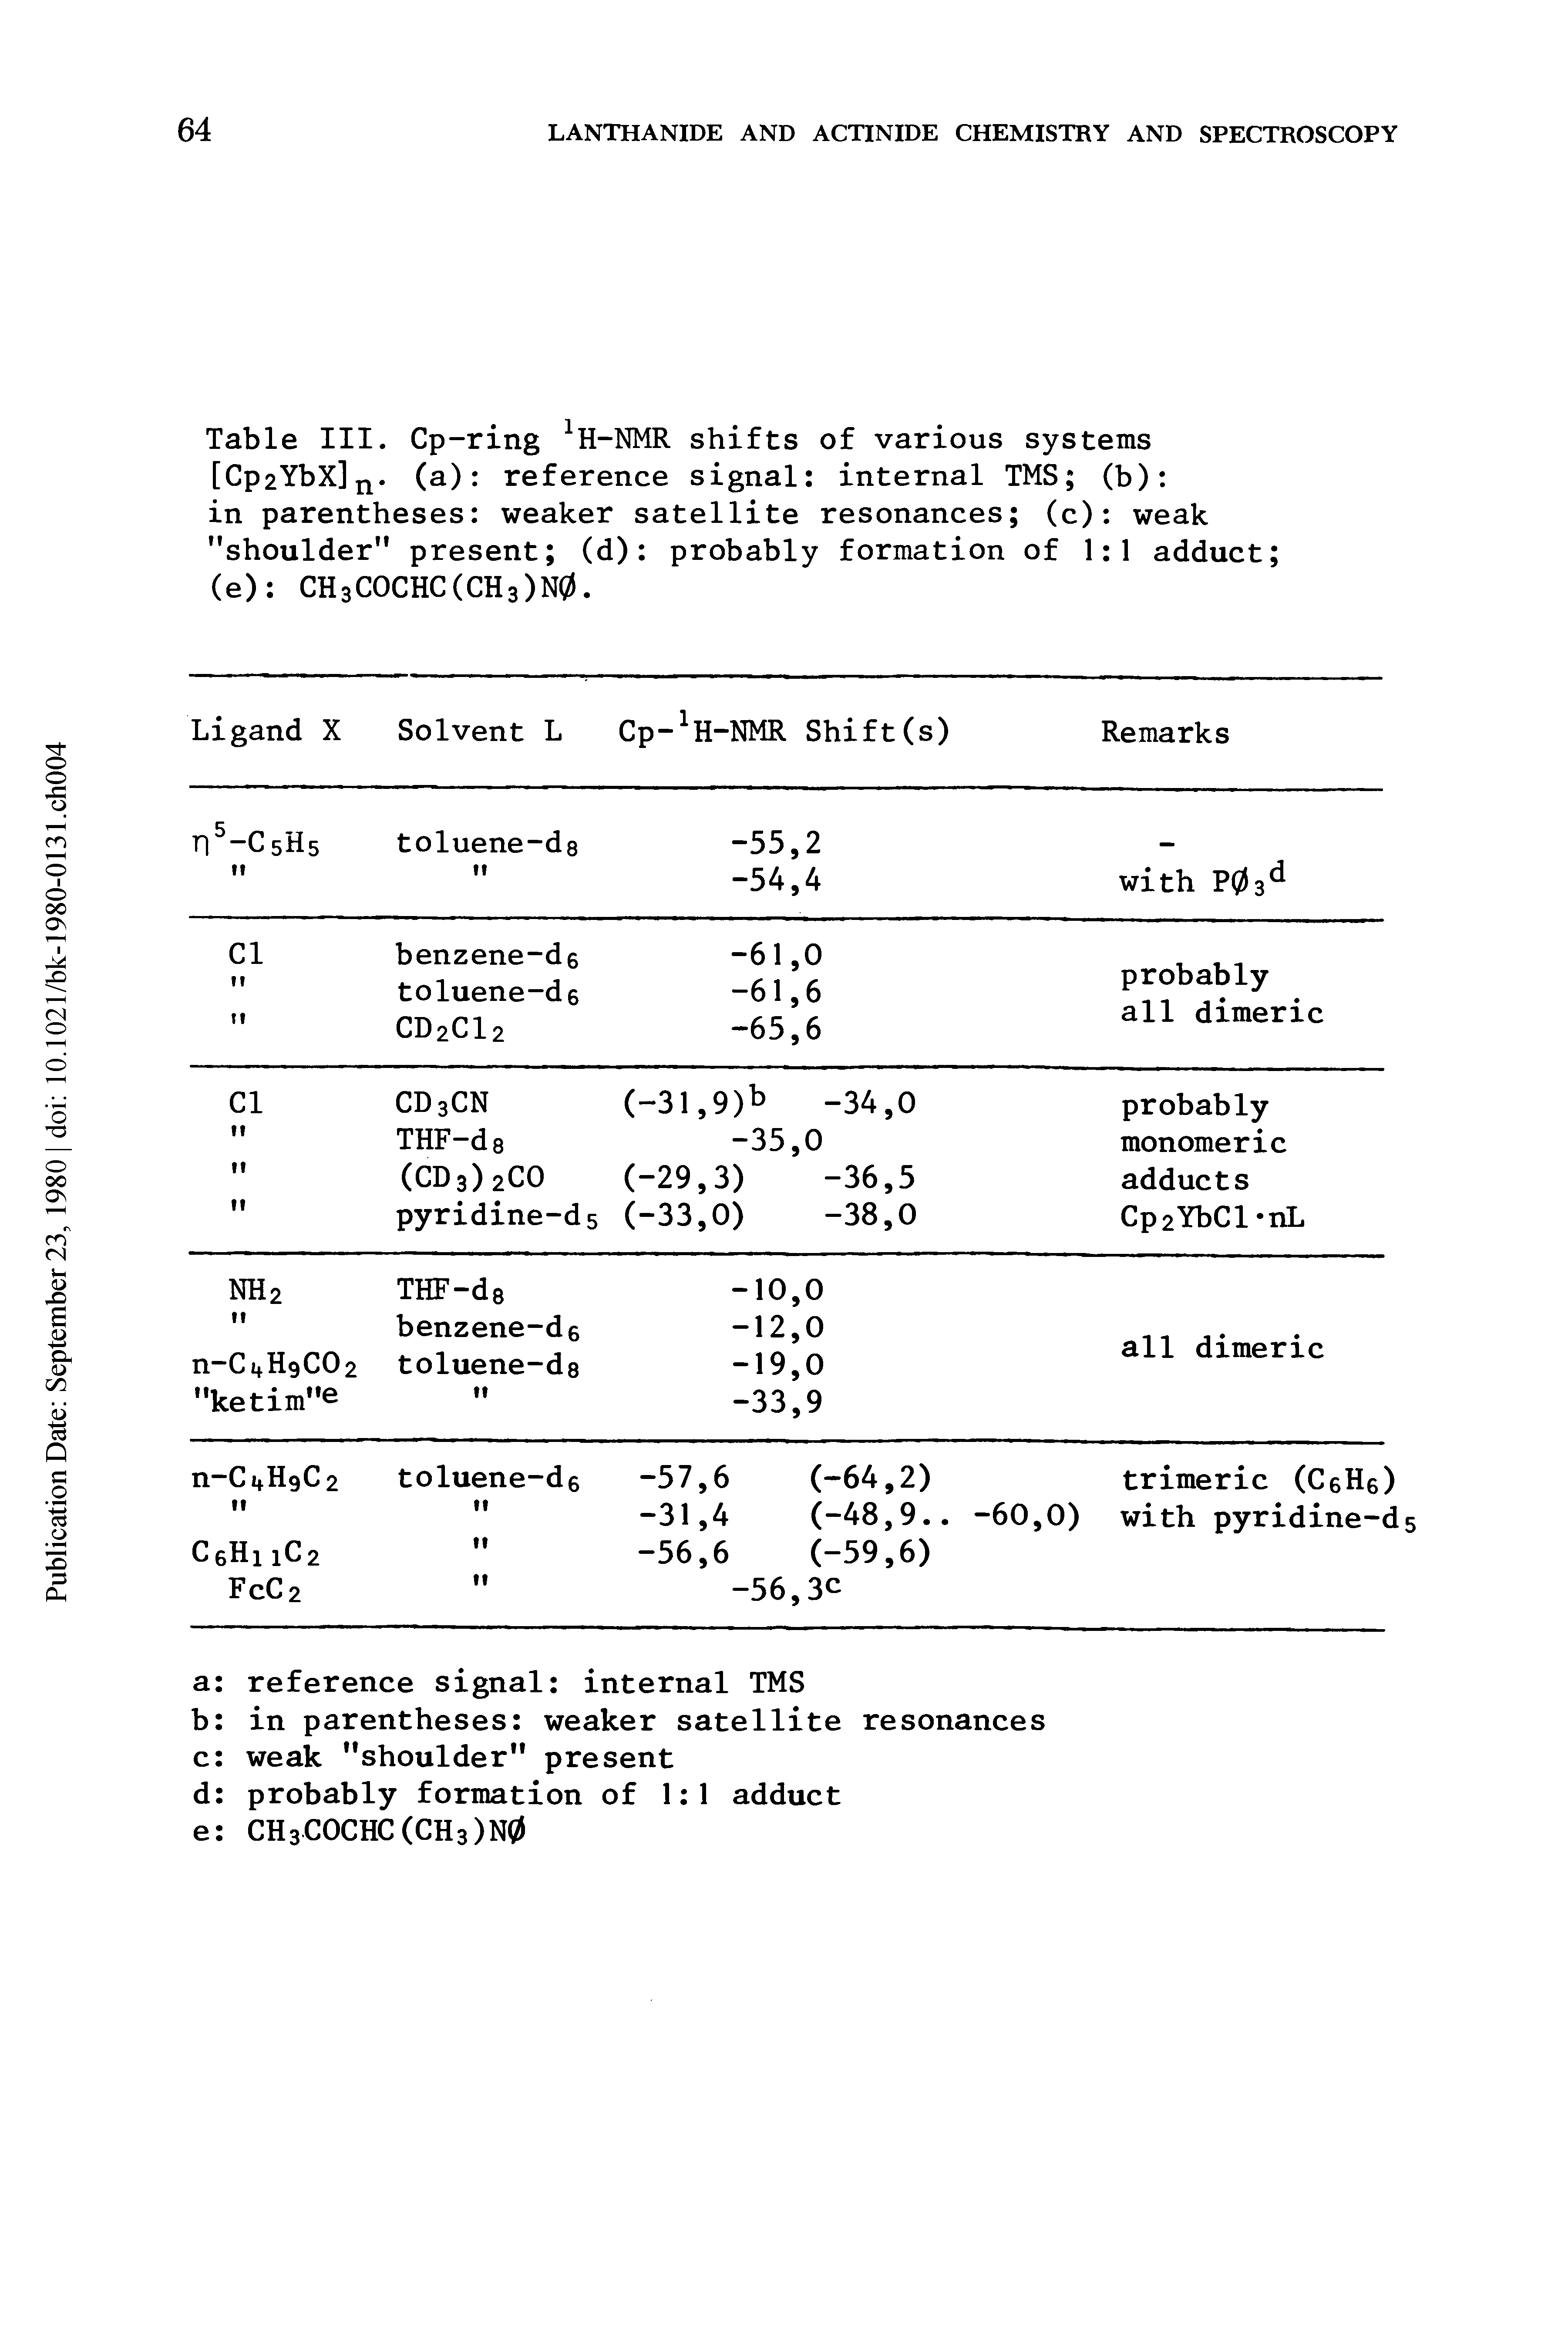 Table III. Cp-ring -NMR shifts of various systems [Cp2YbX]n. (a) reference signal internal TMS (b) in parentheses weaker satellite resonances (c) weak "shoulder" present (d) probably formation of 1 1 adduct (e) CH3COCHC(CH3)N0.